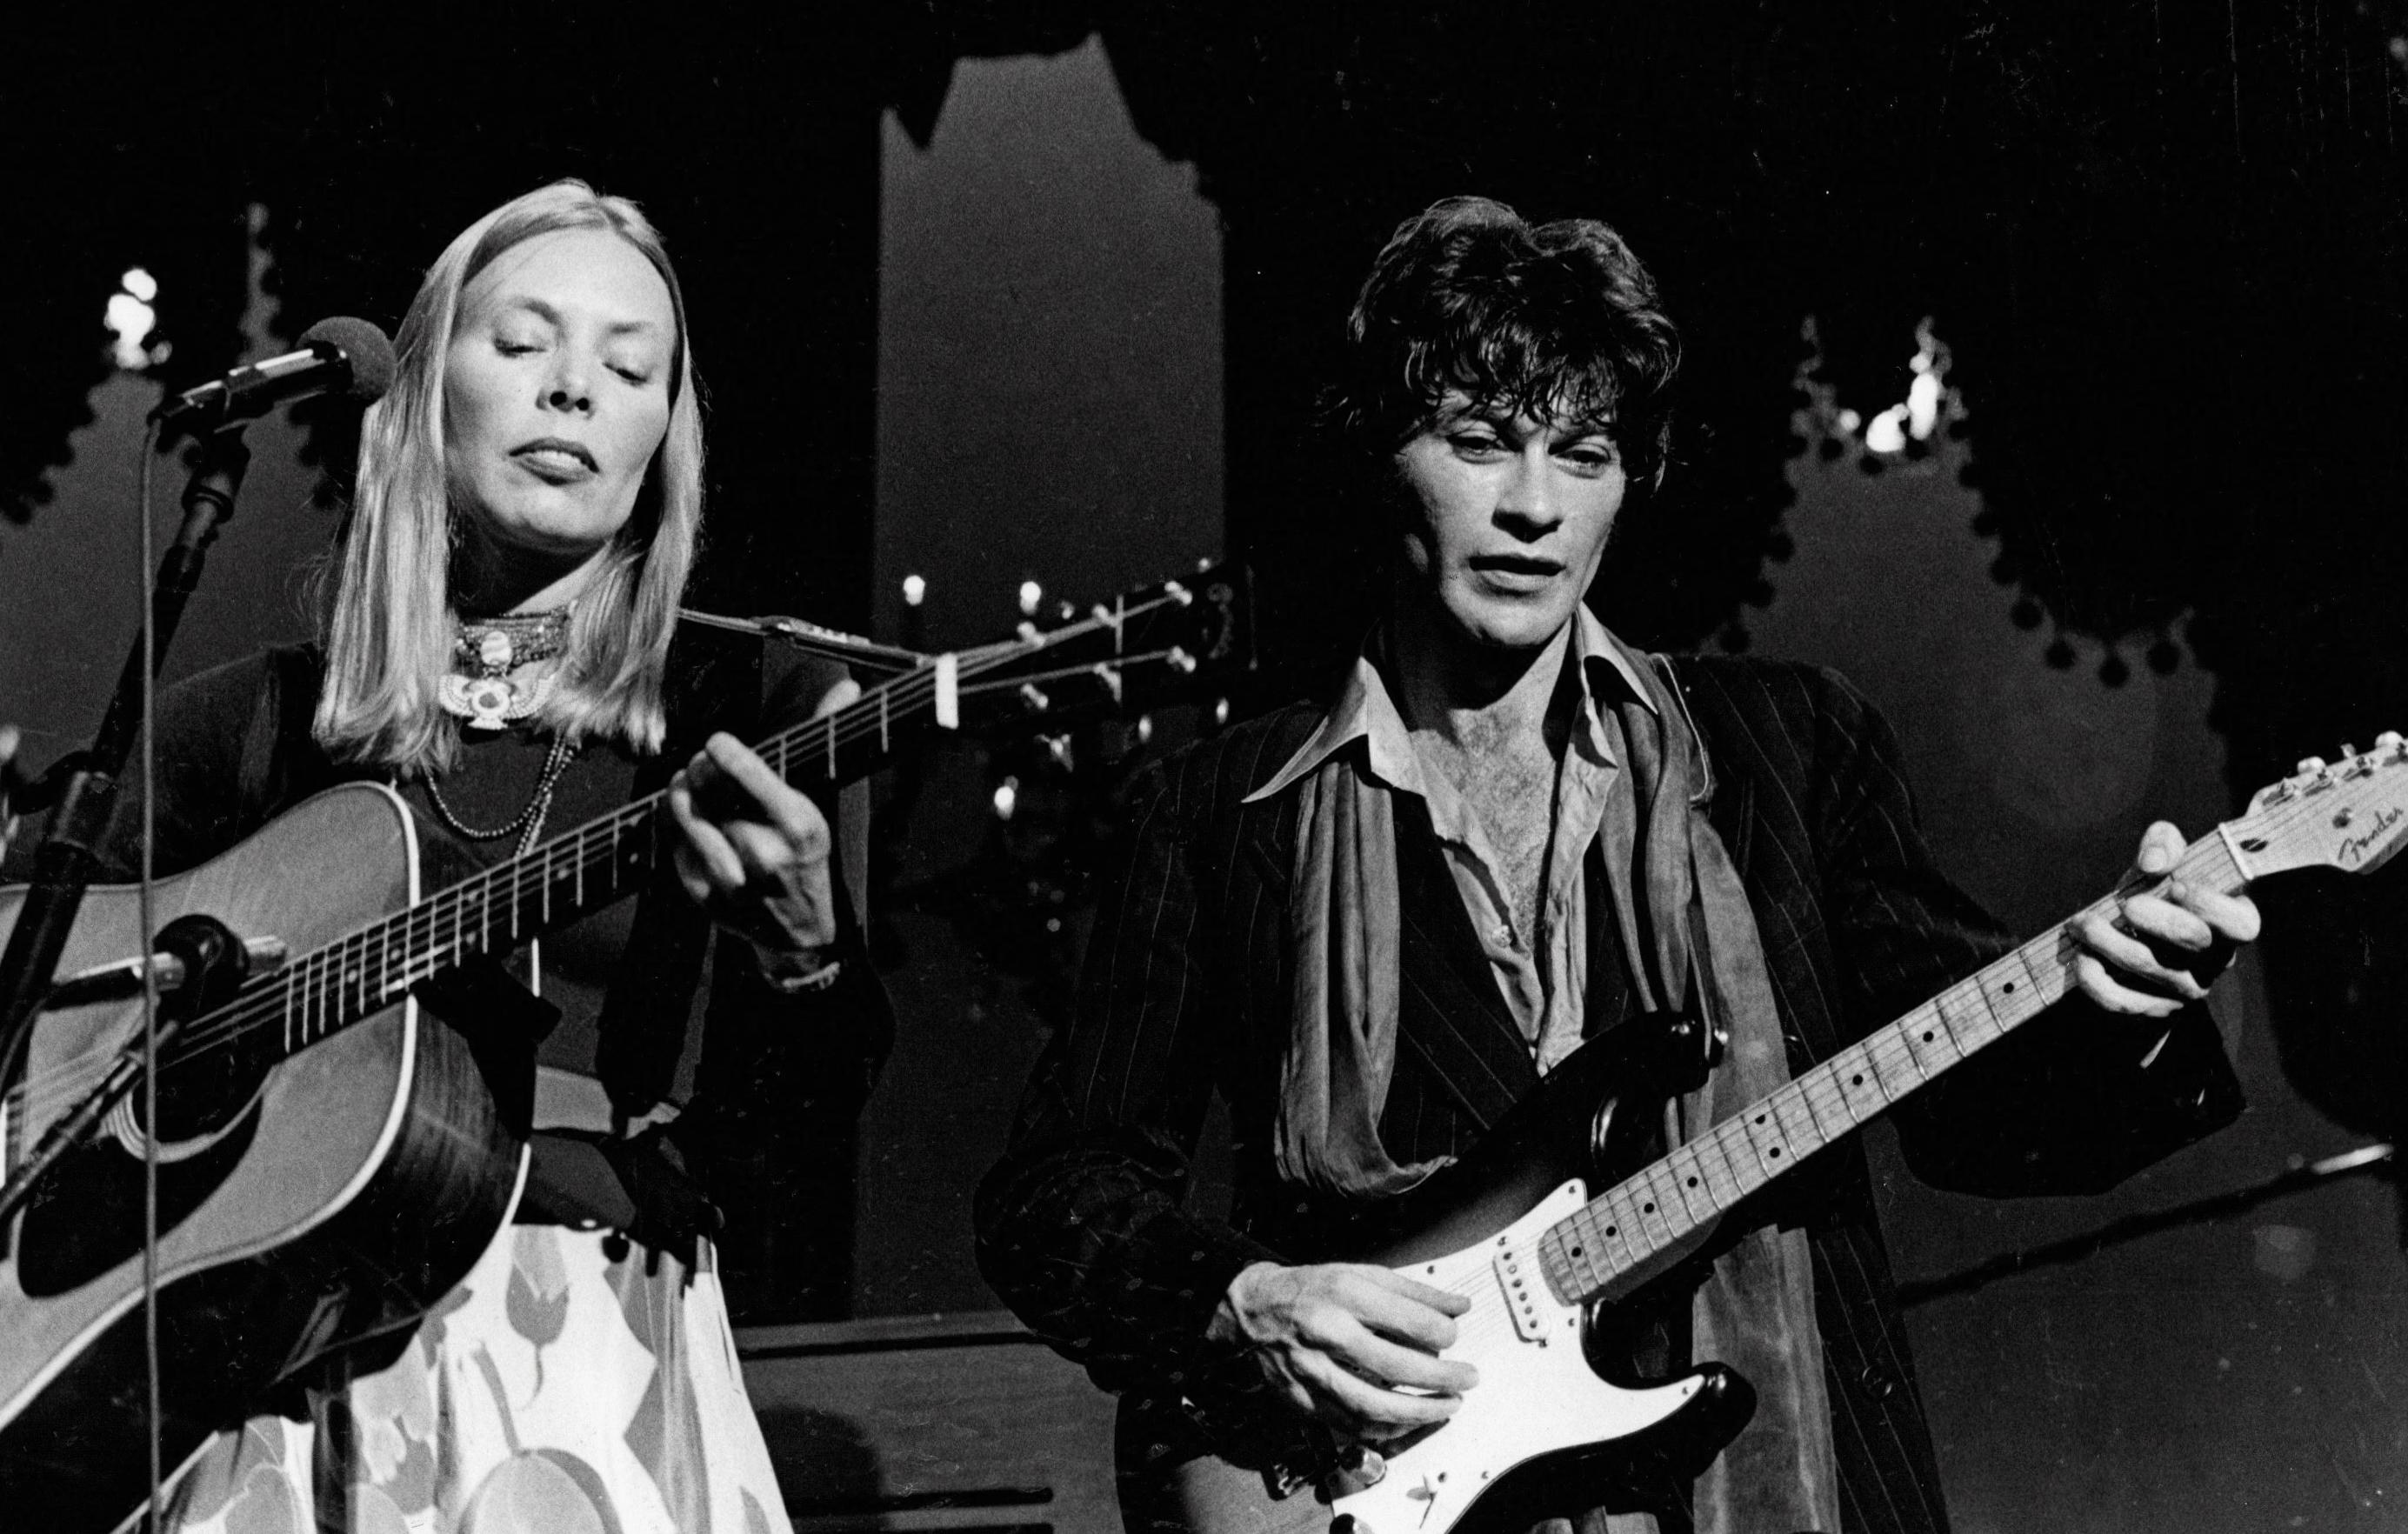 Unknown Portrait Photograph - Joni and Robbie Roberts Performing on Stage Vintage Original Photograph